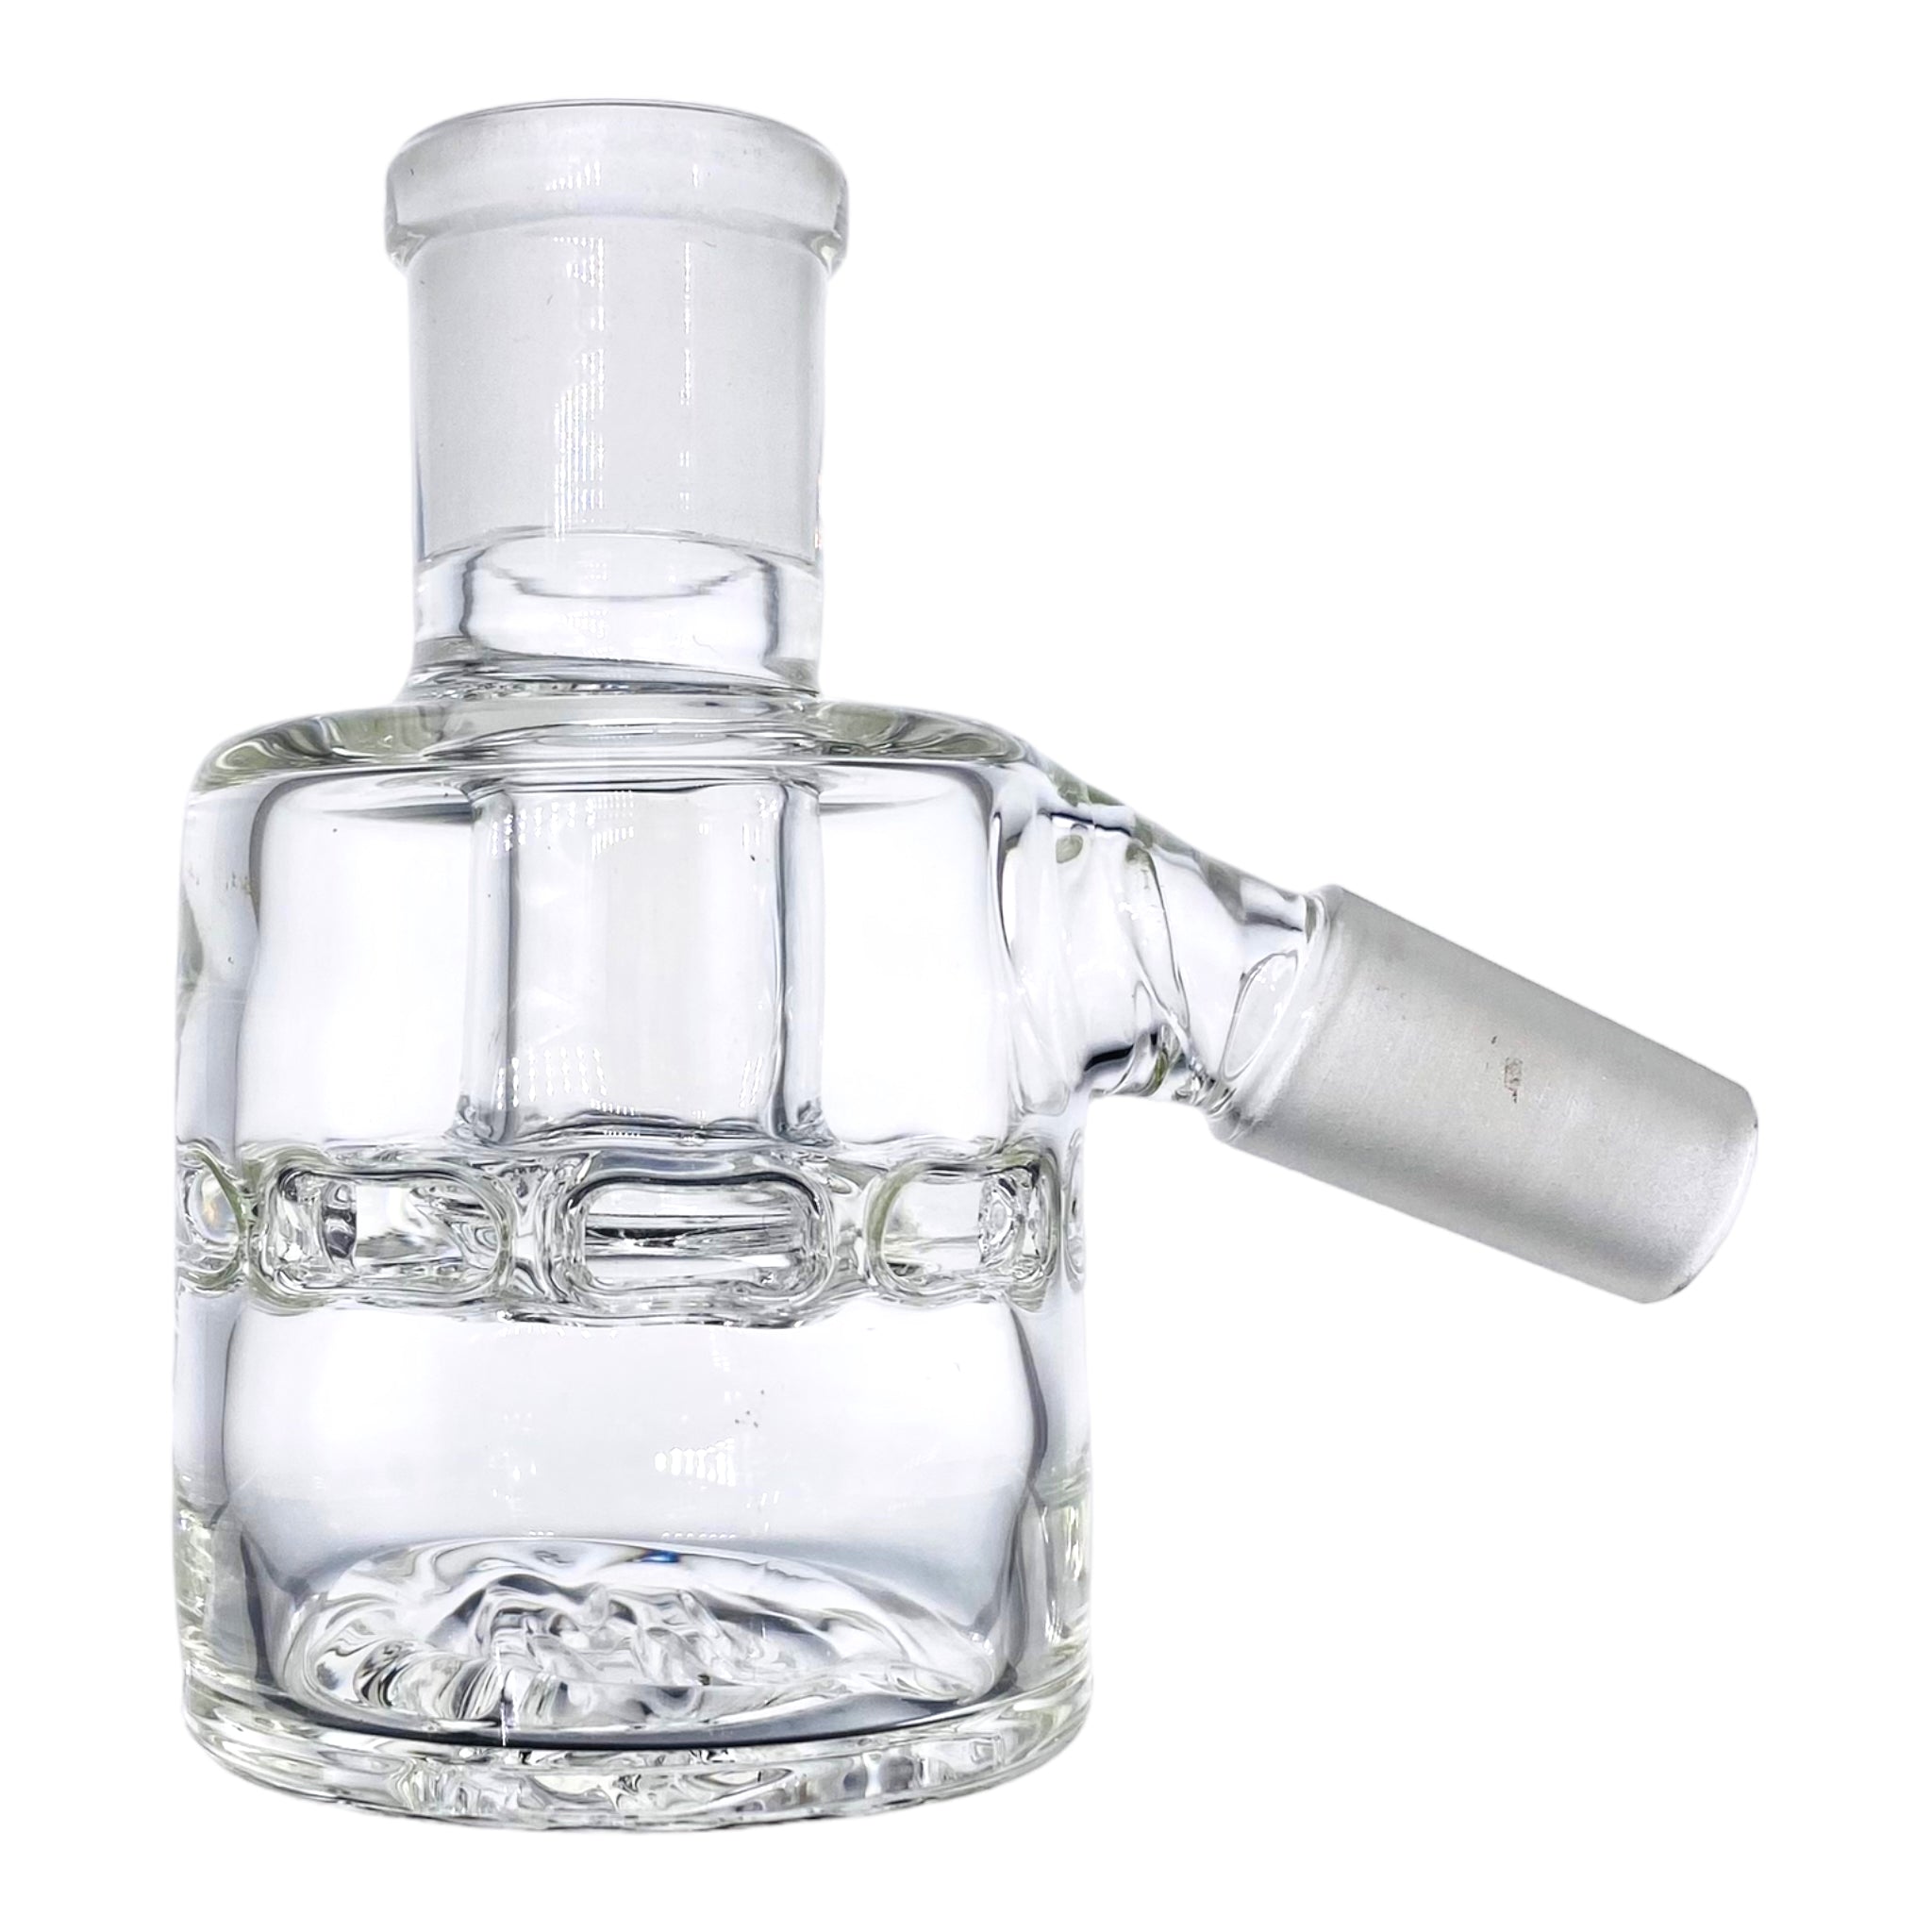 14mm dry ashcatcher for bongs by monarch glass